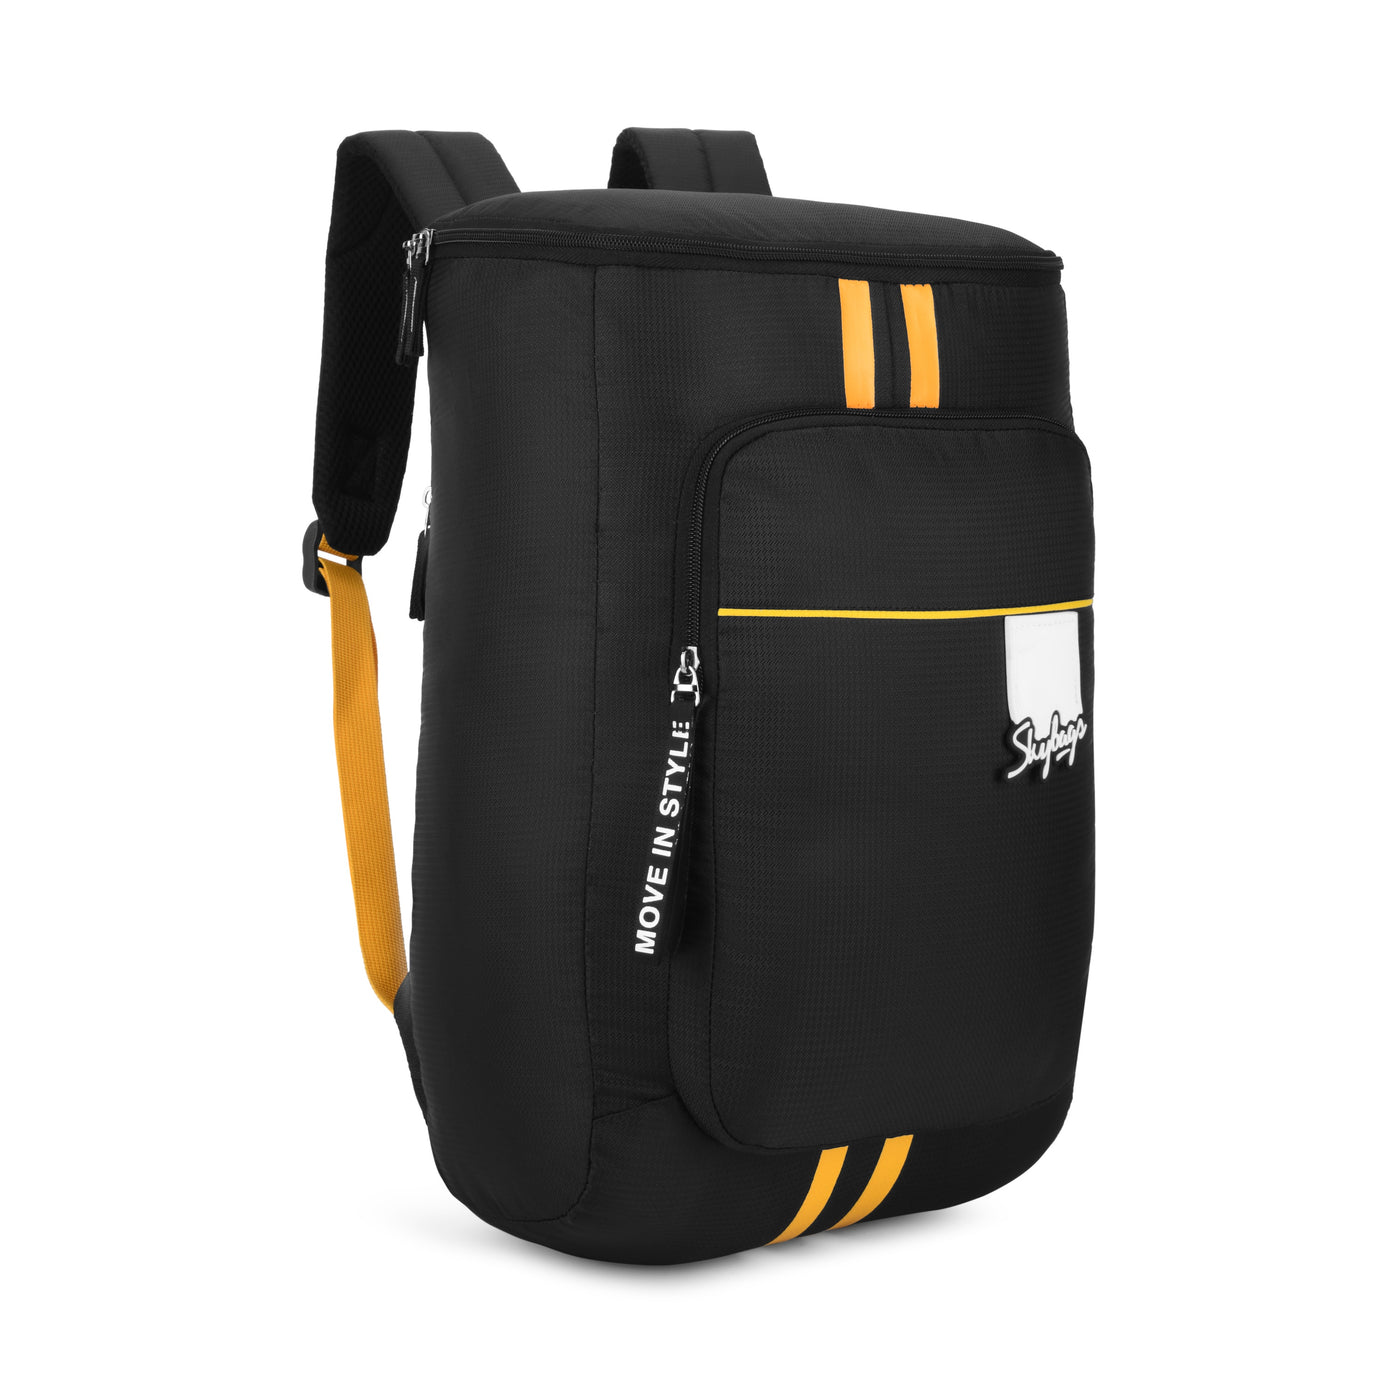 Skybags TRIBE PRO 01  